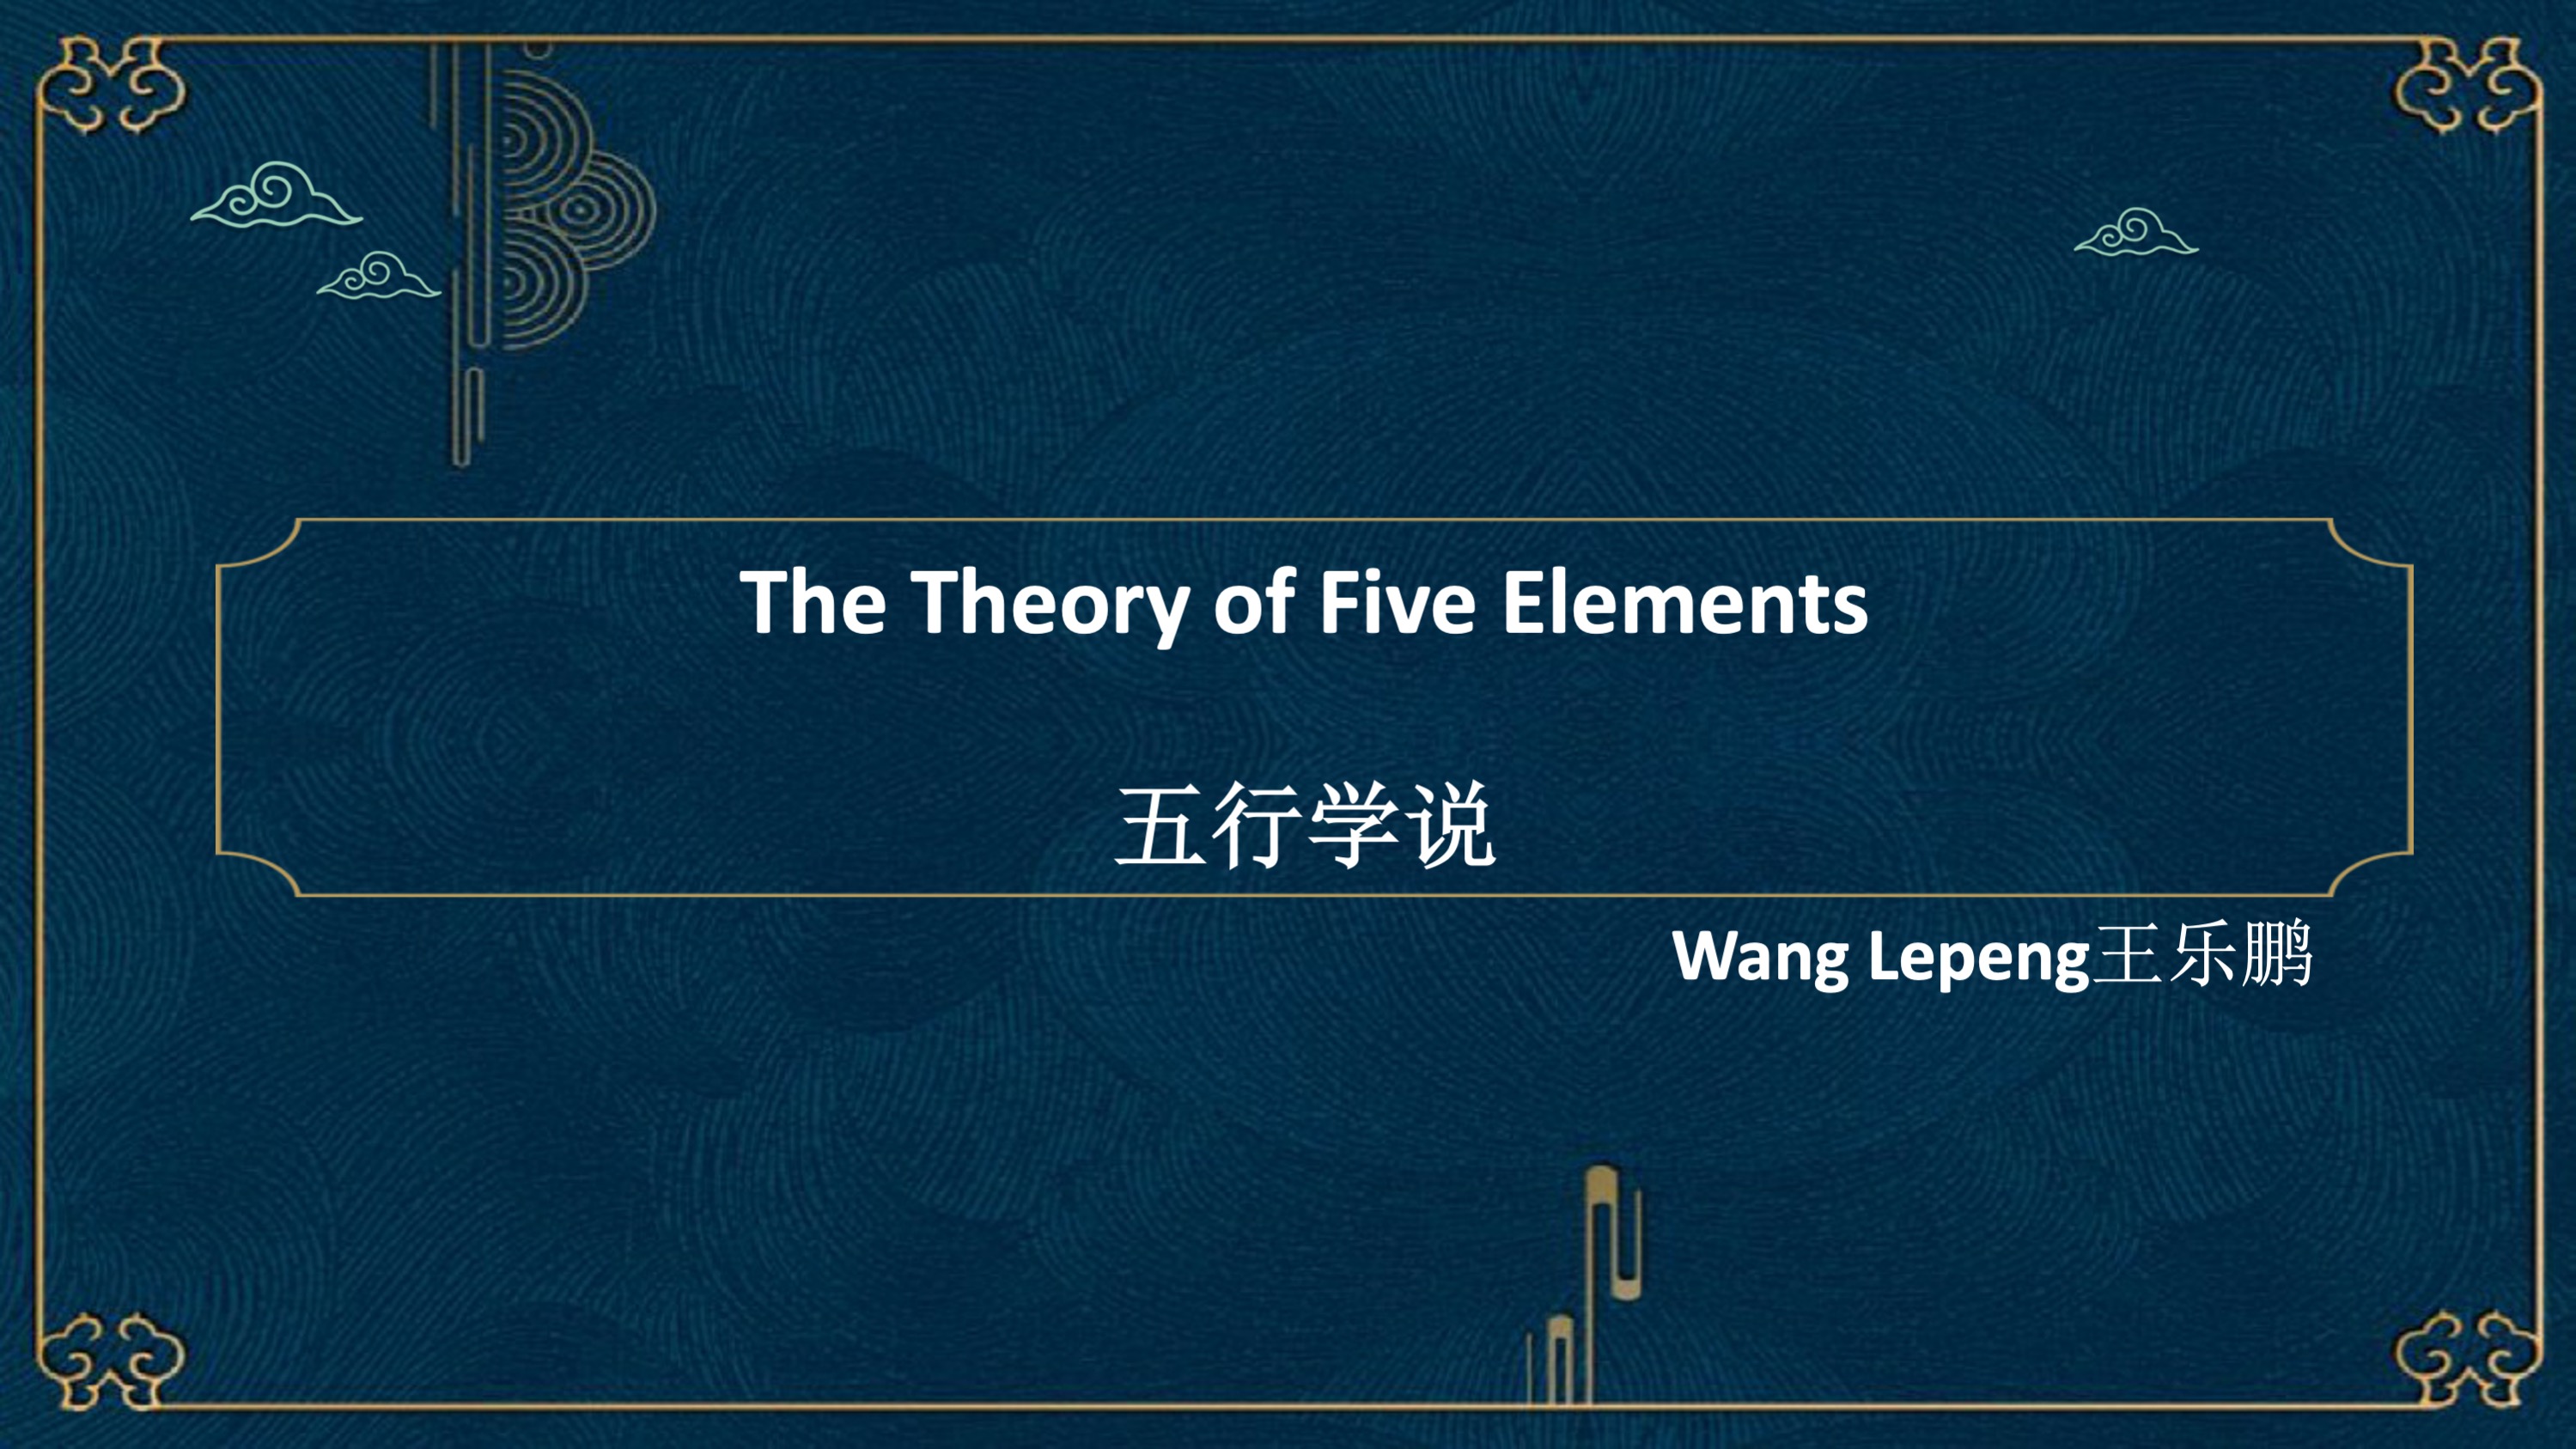 The Theory of Five Elements